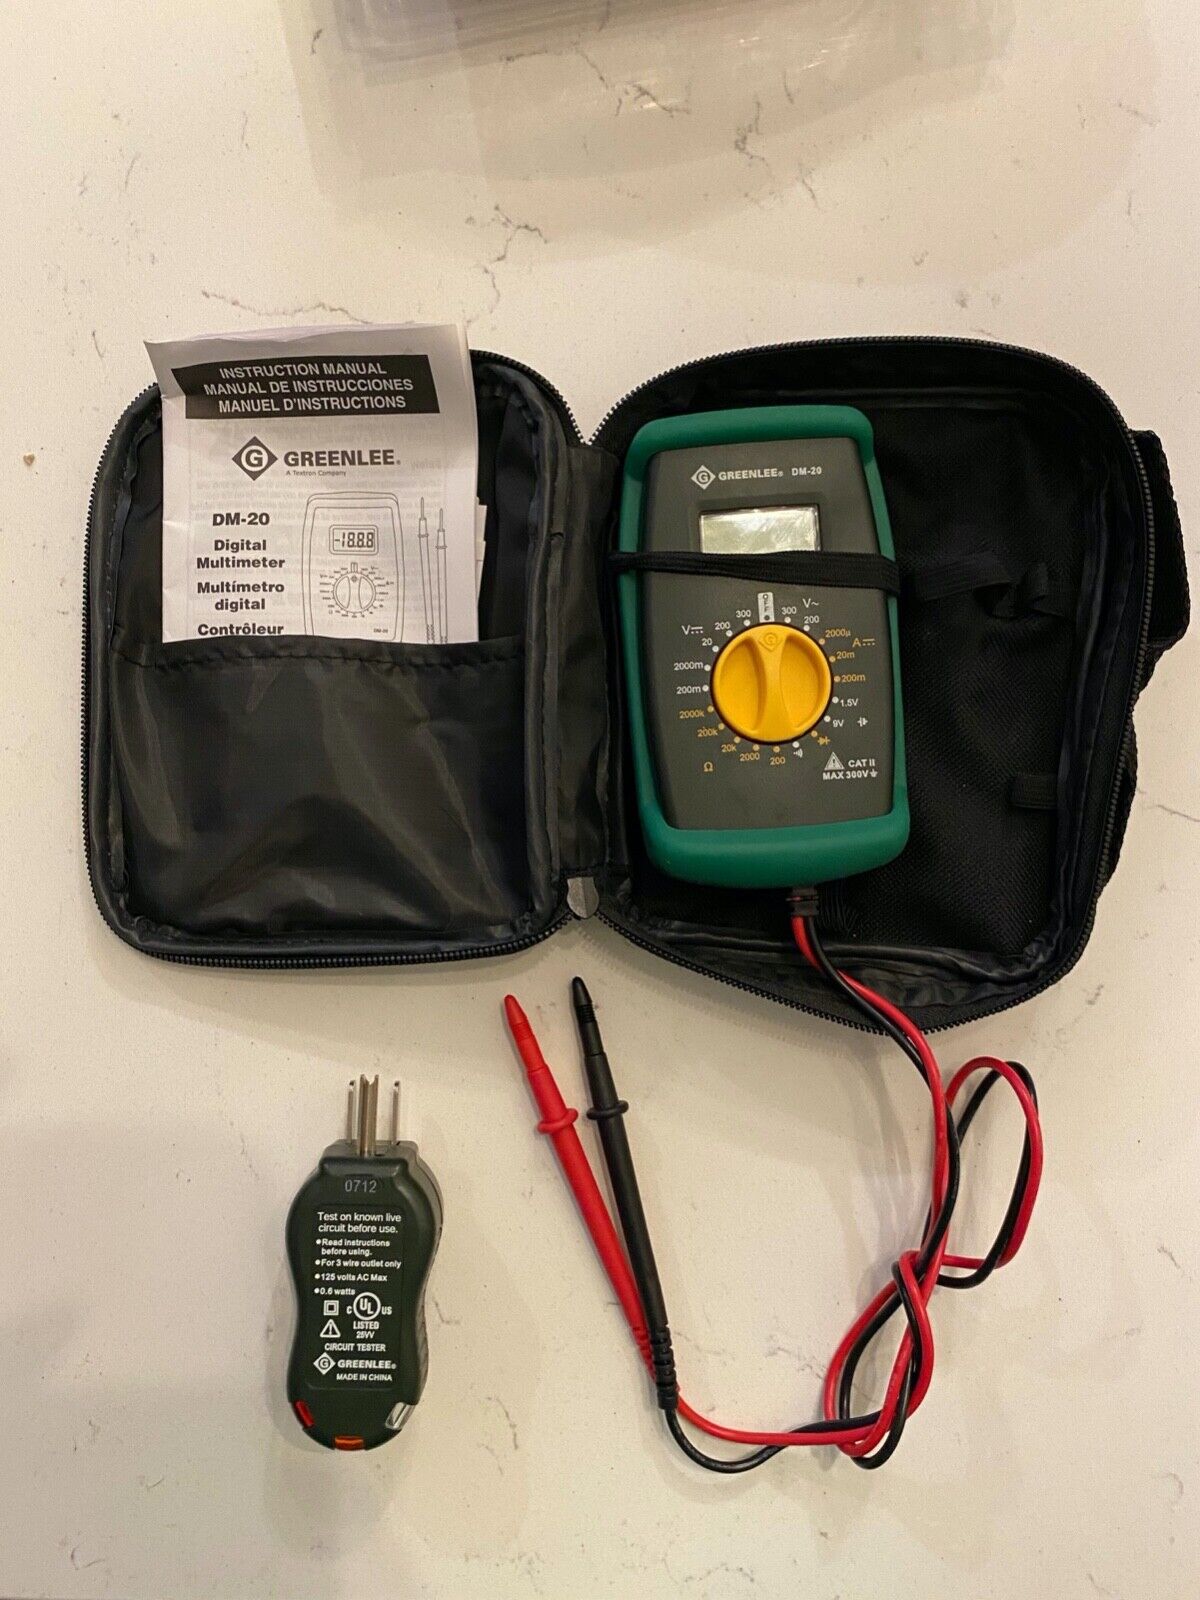 Greenlee DM-20 digital Multimeter and GT-10 polarity cube in case. for